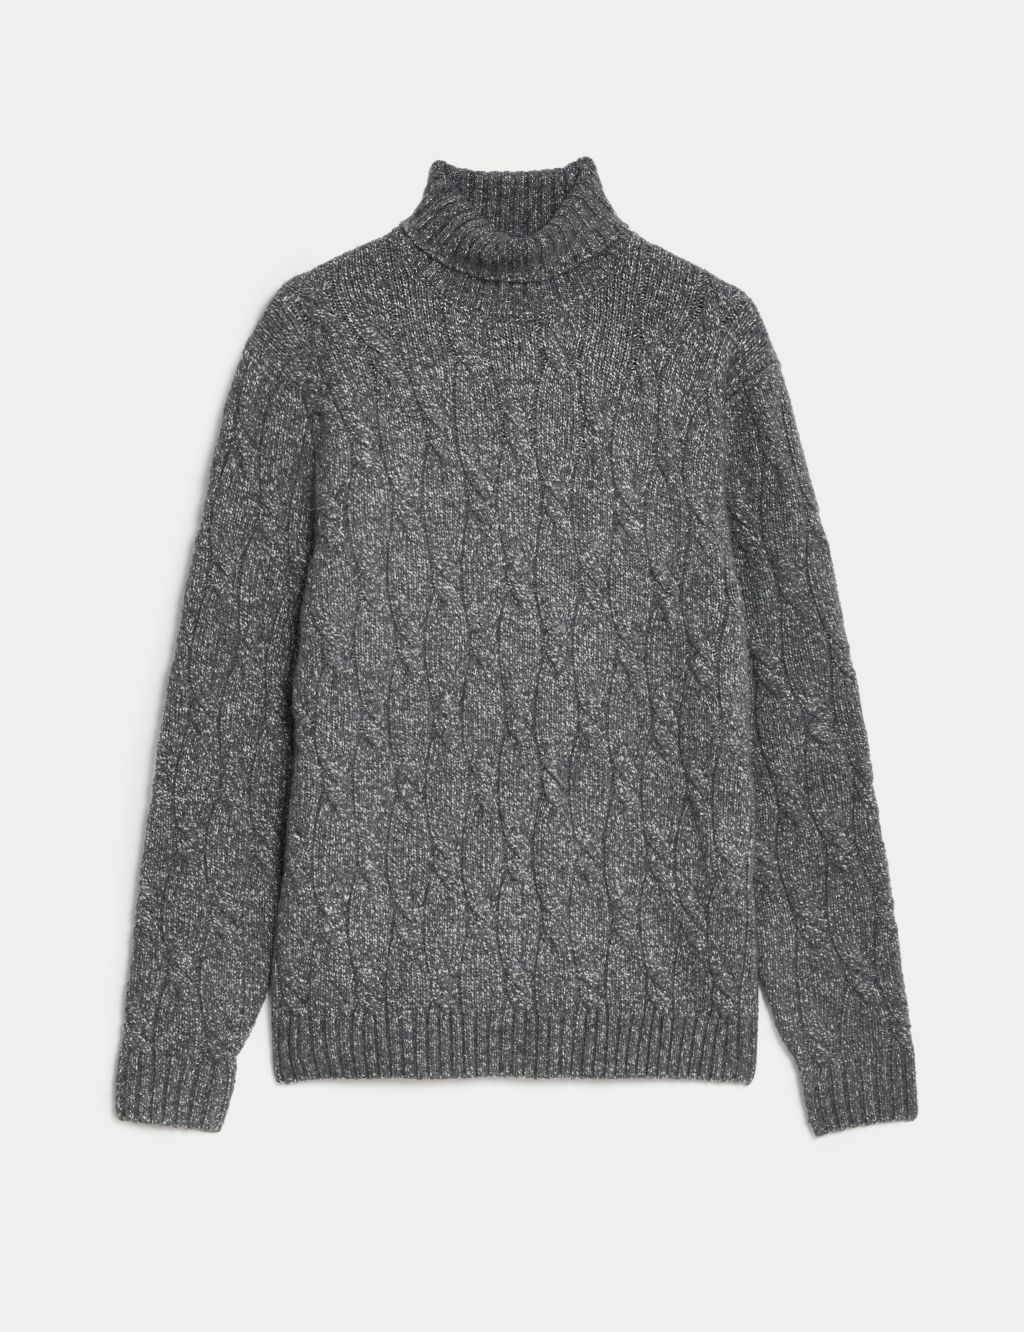 Cable High Neck Jumper image 2